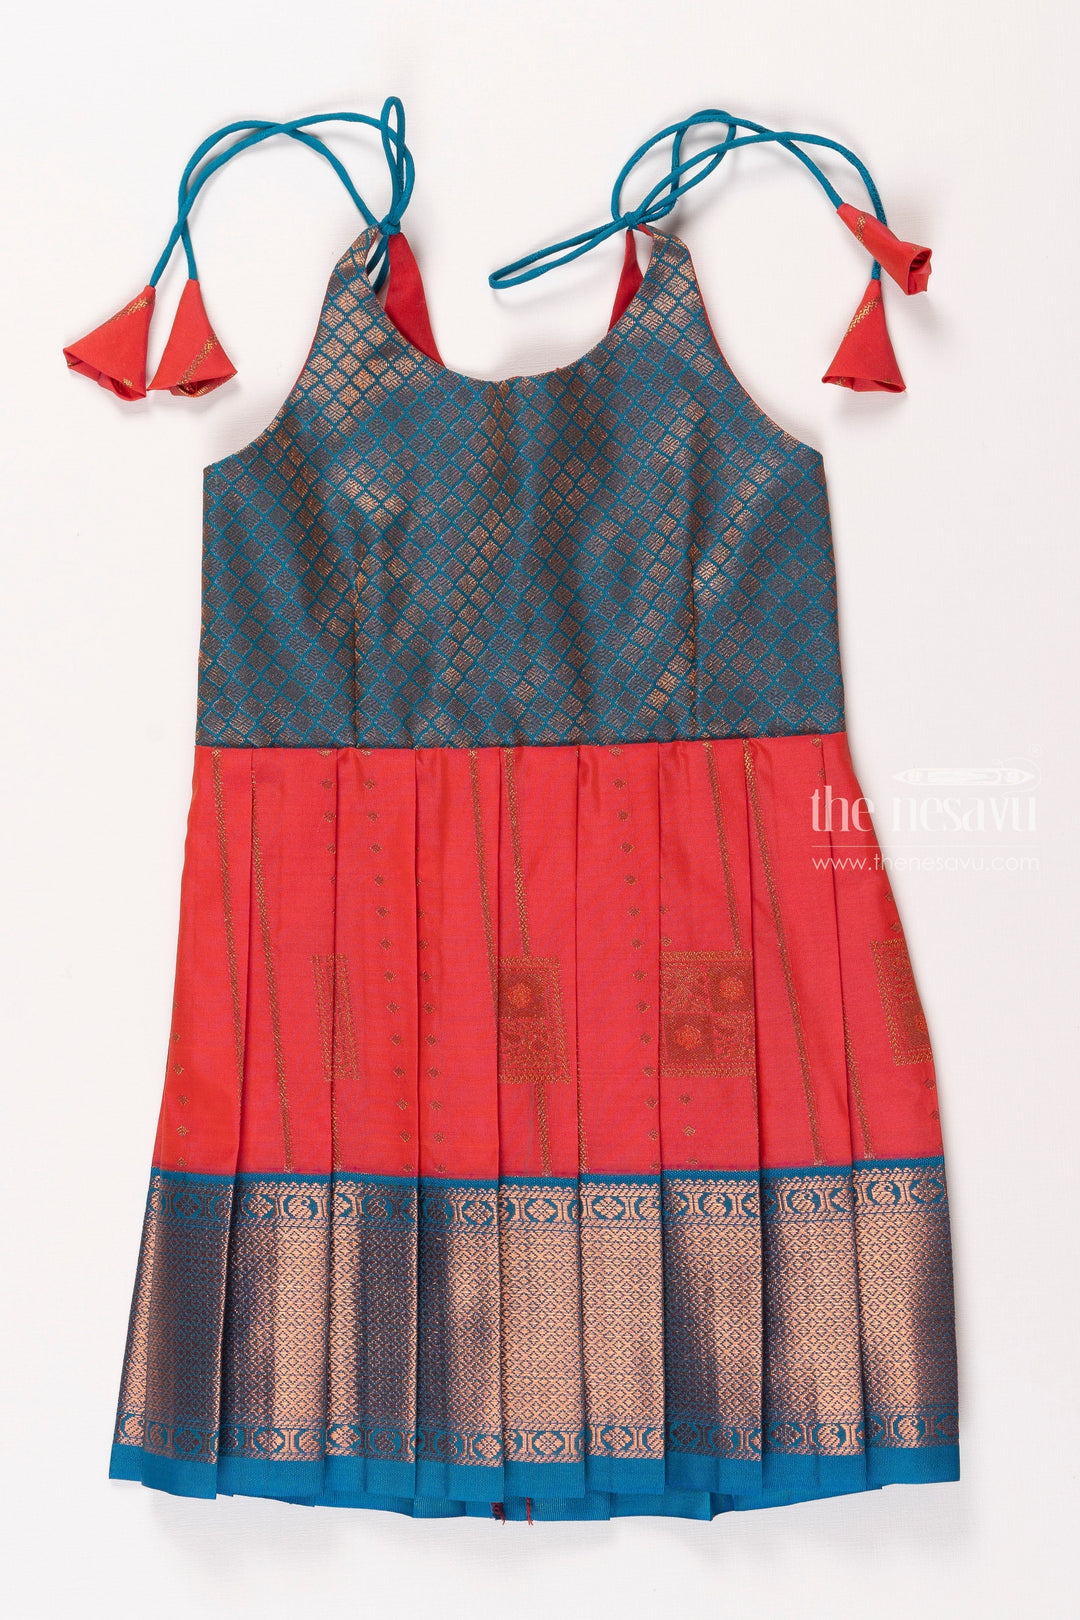 The Nesavu Tie-up Frock Regal Red and Blue Silk Tie-Up Frock for Girls Nesavu Girls Red and Blue Silk Frock | Elegant Tie Up Design | The Nesavu